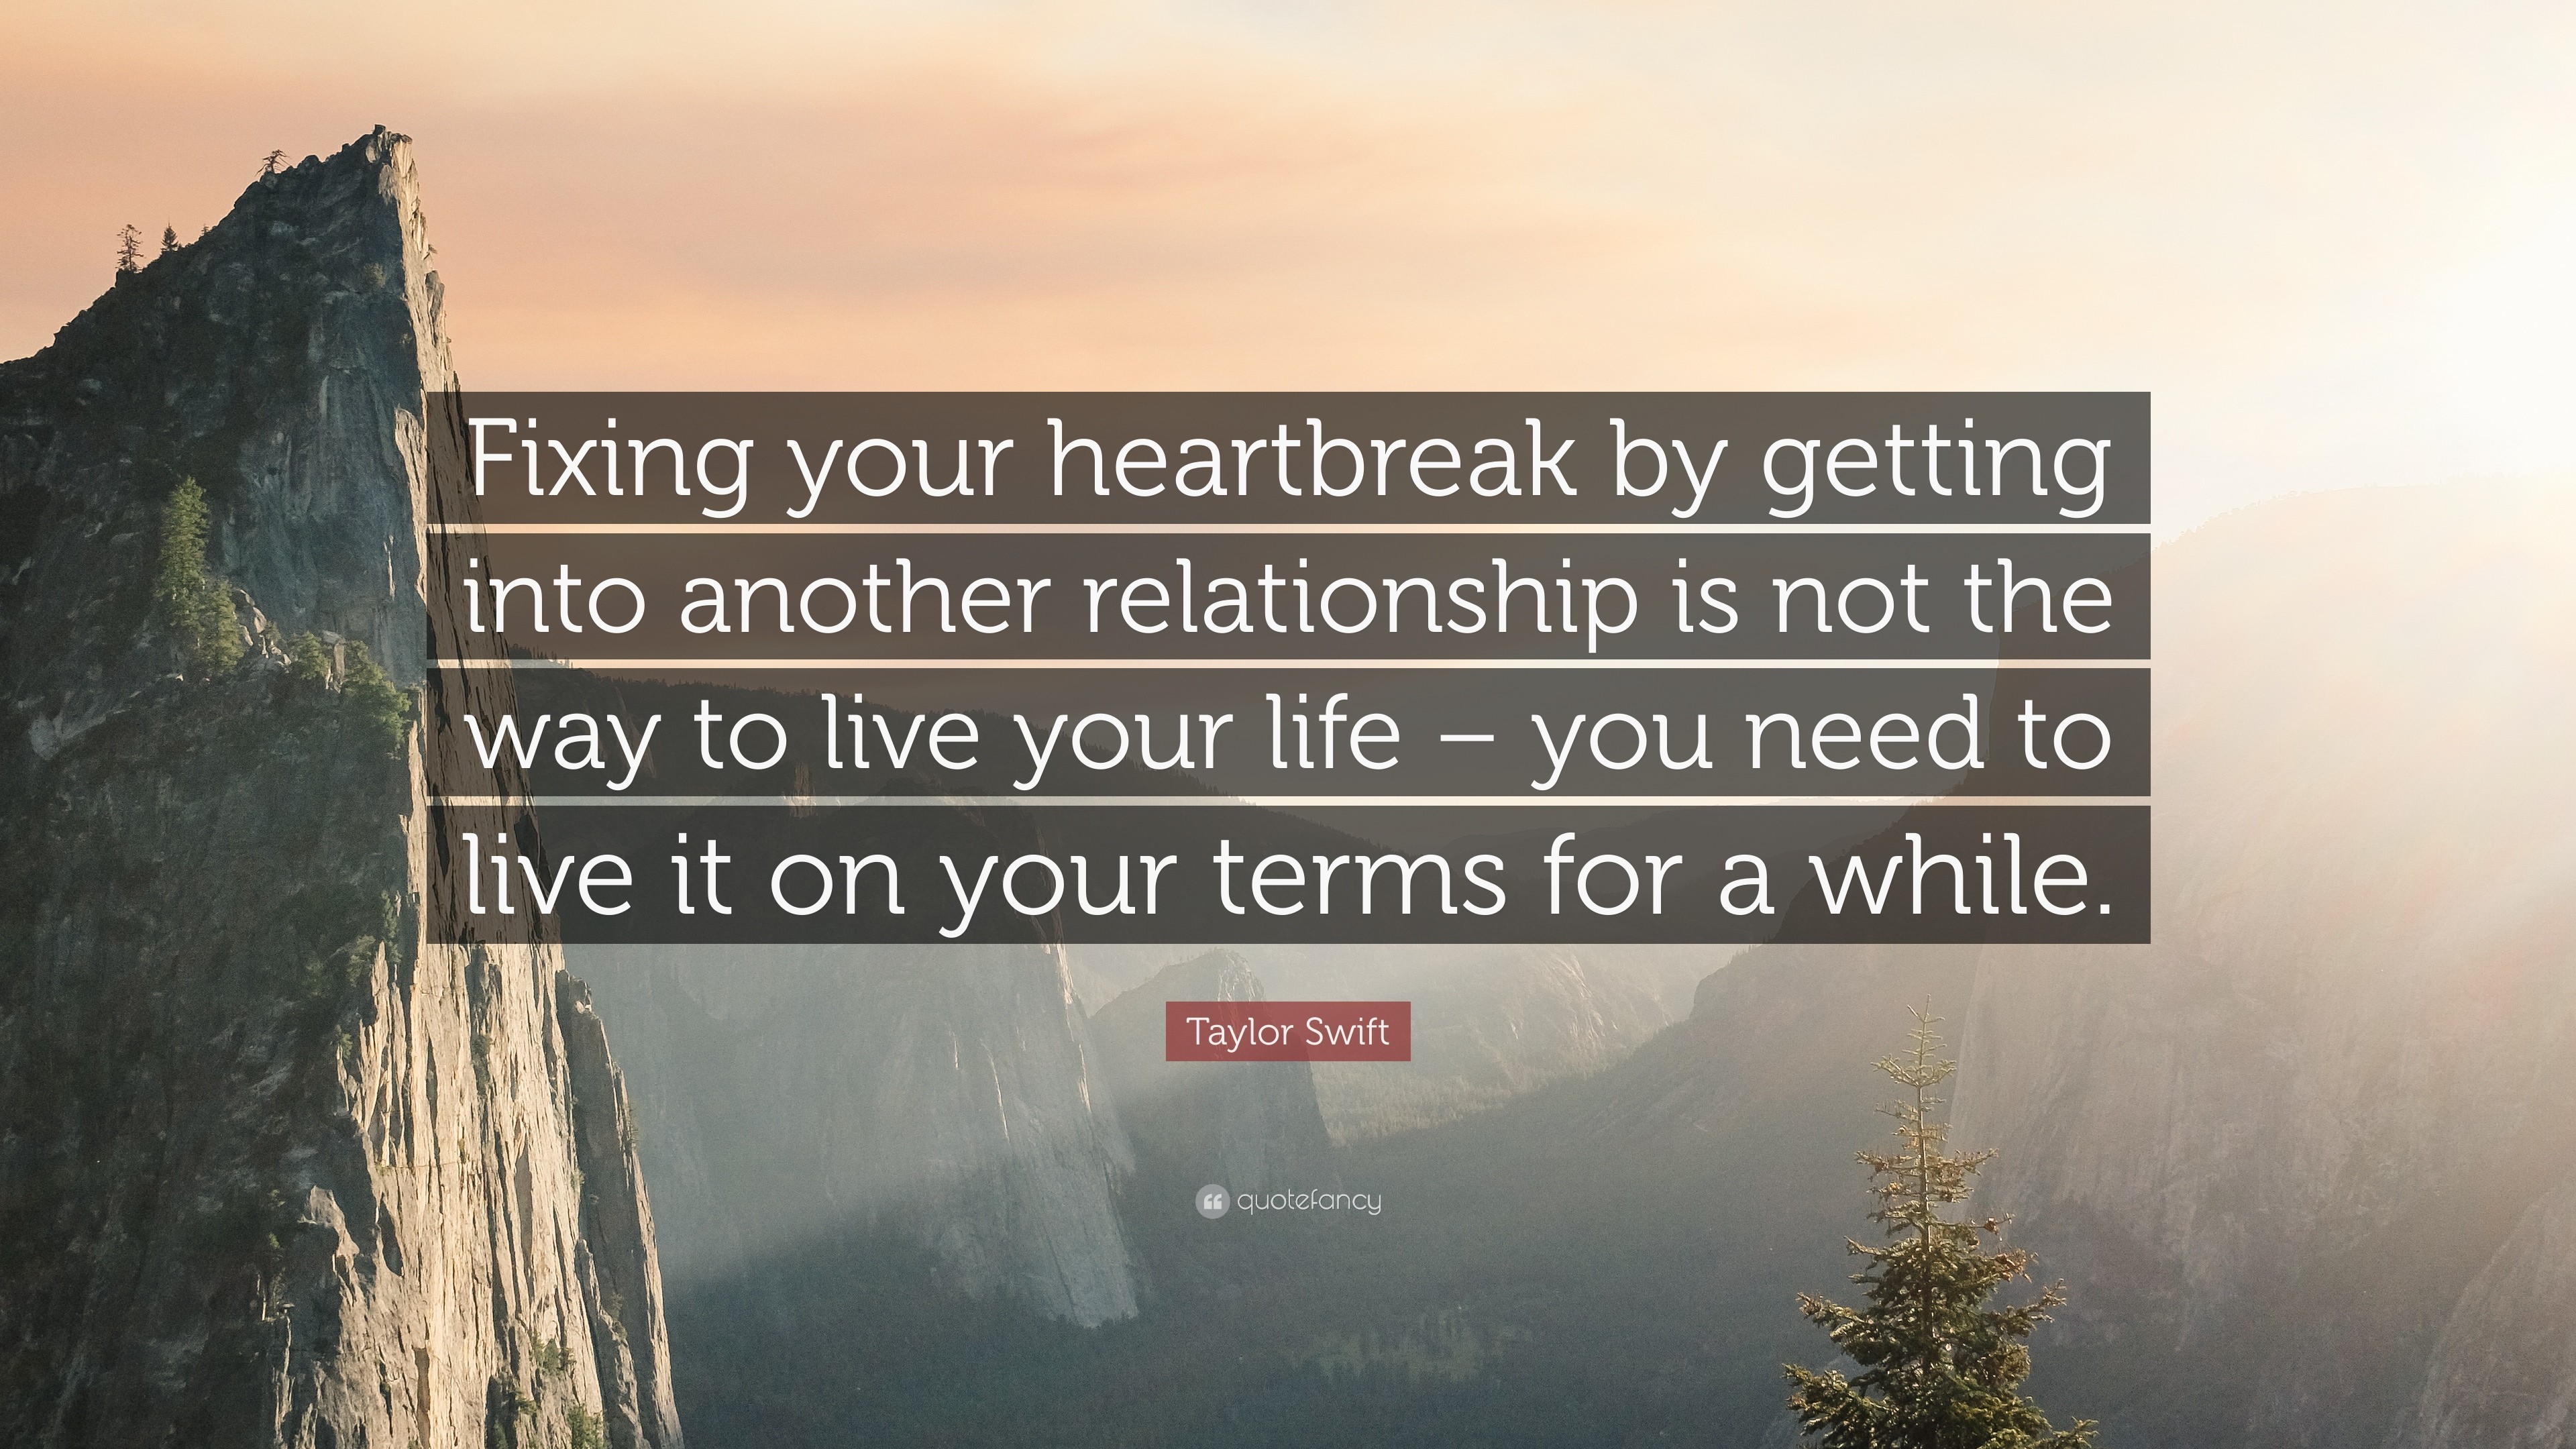 3840x2160 Taylor Swift Quote: “Fixing your heartbreak by getting into another  relationship is not the